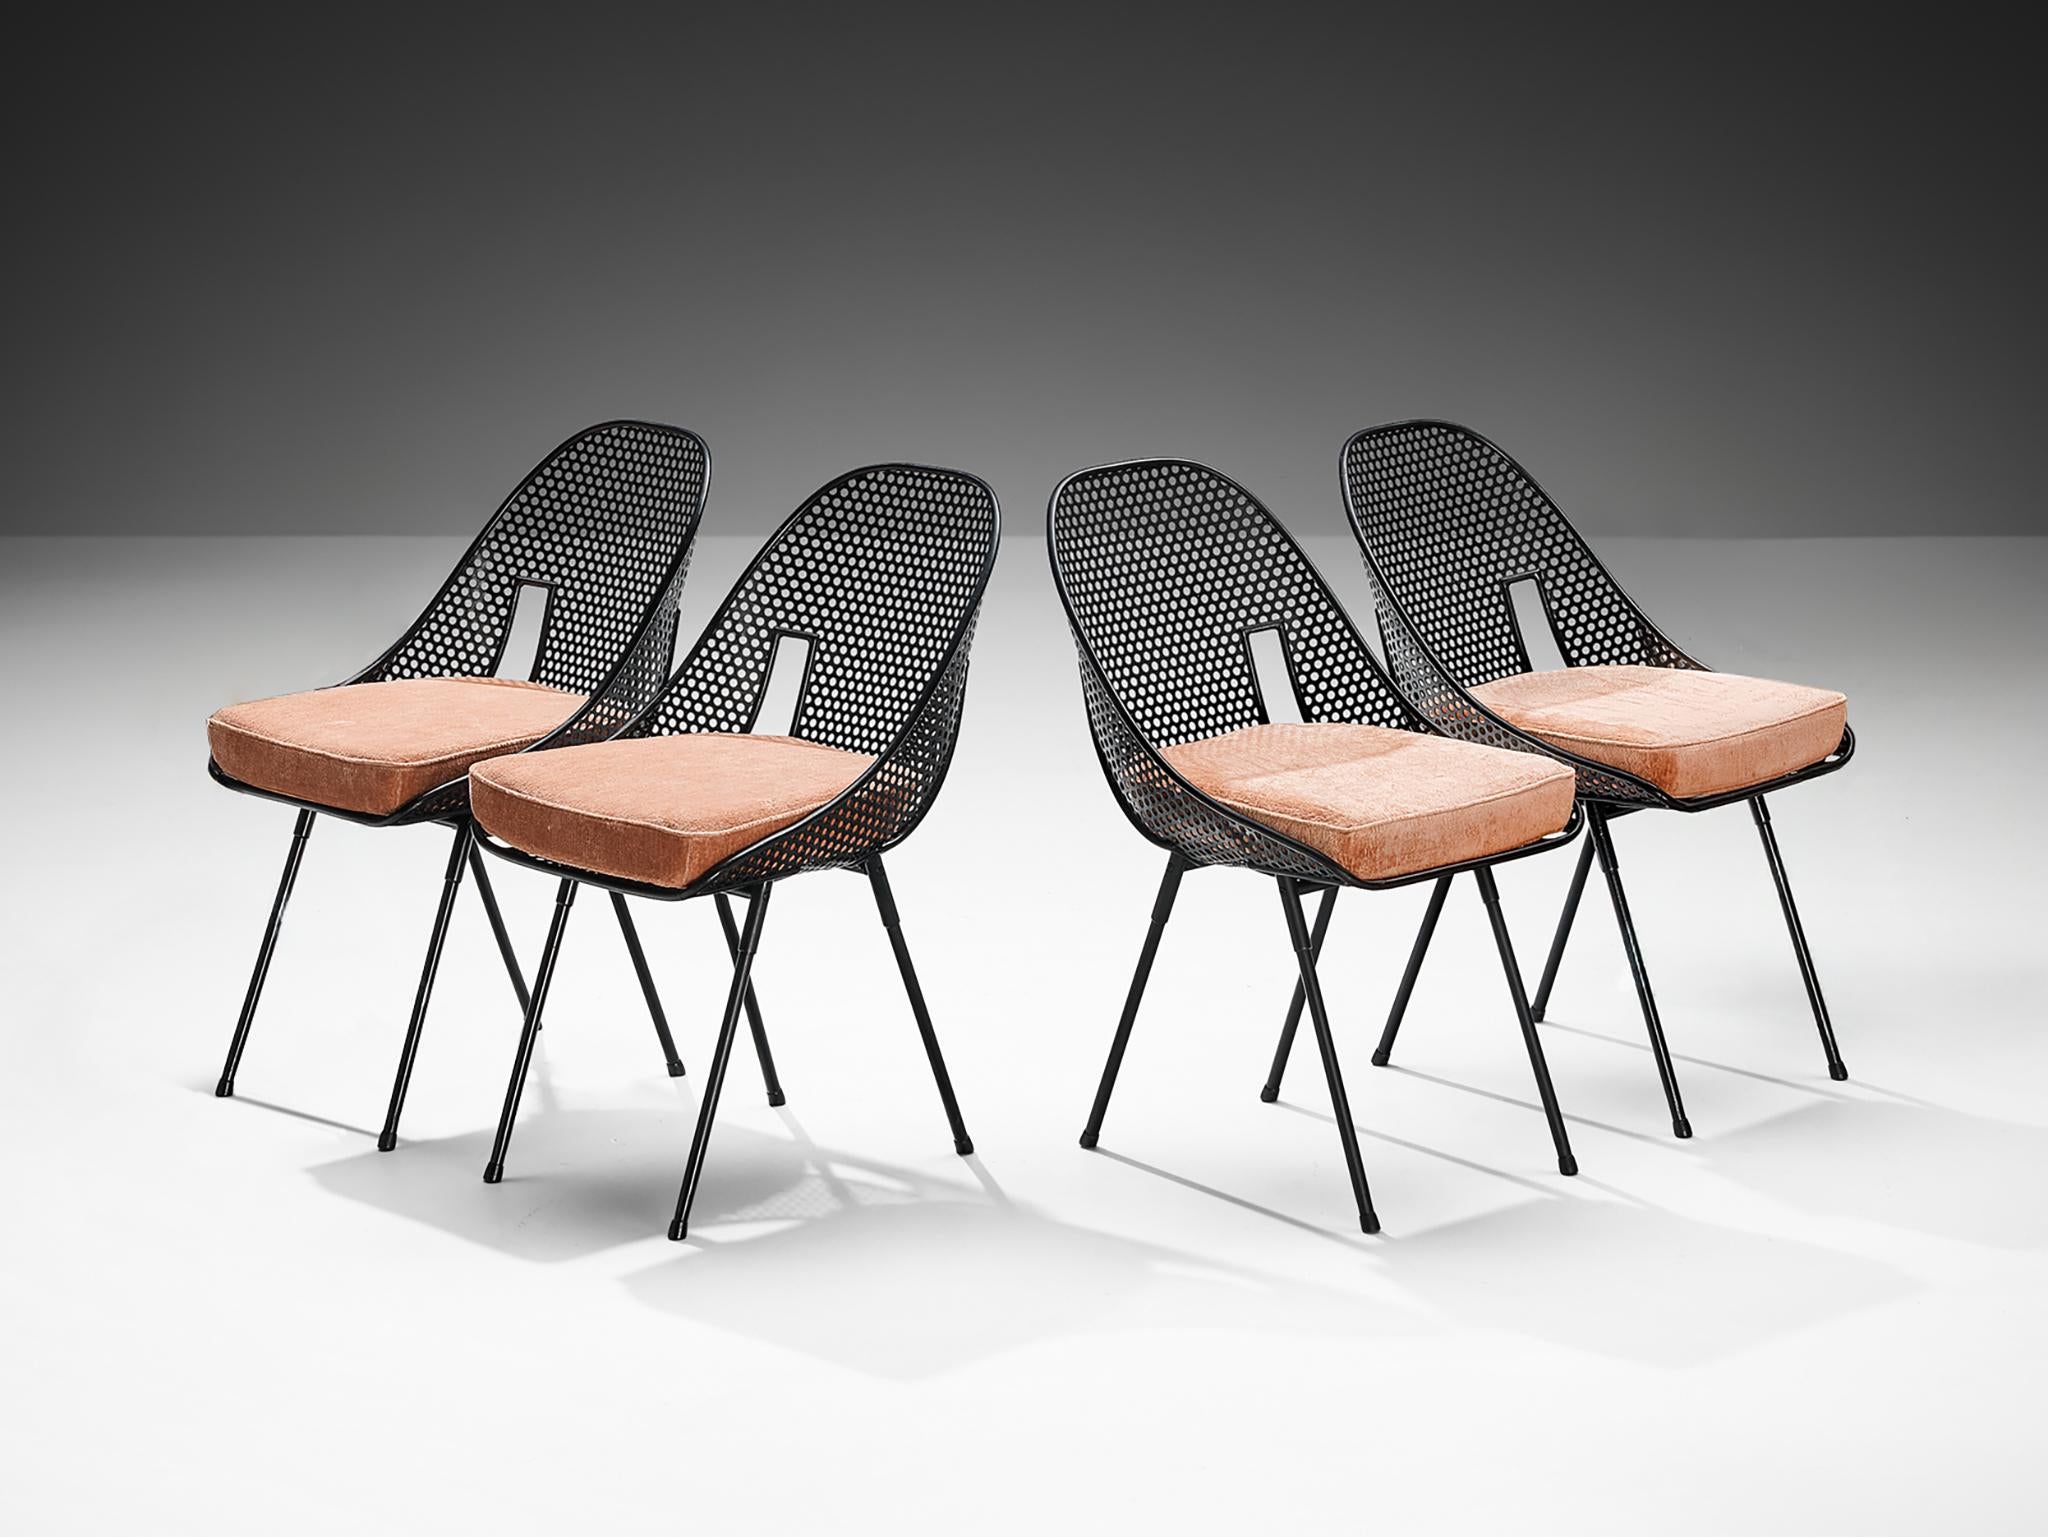 Rare Giuseppe De Vivo Set of Four Dining Chairs in Black Perforated Metal